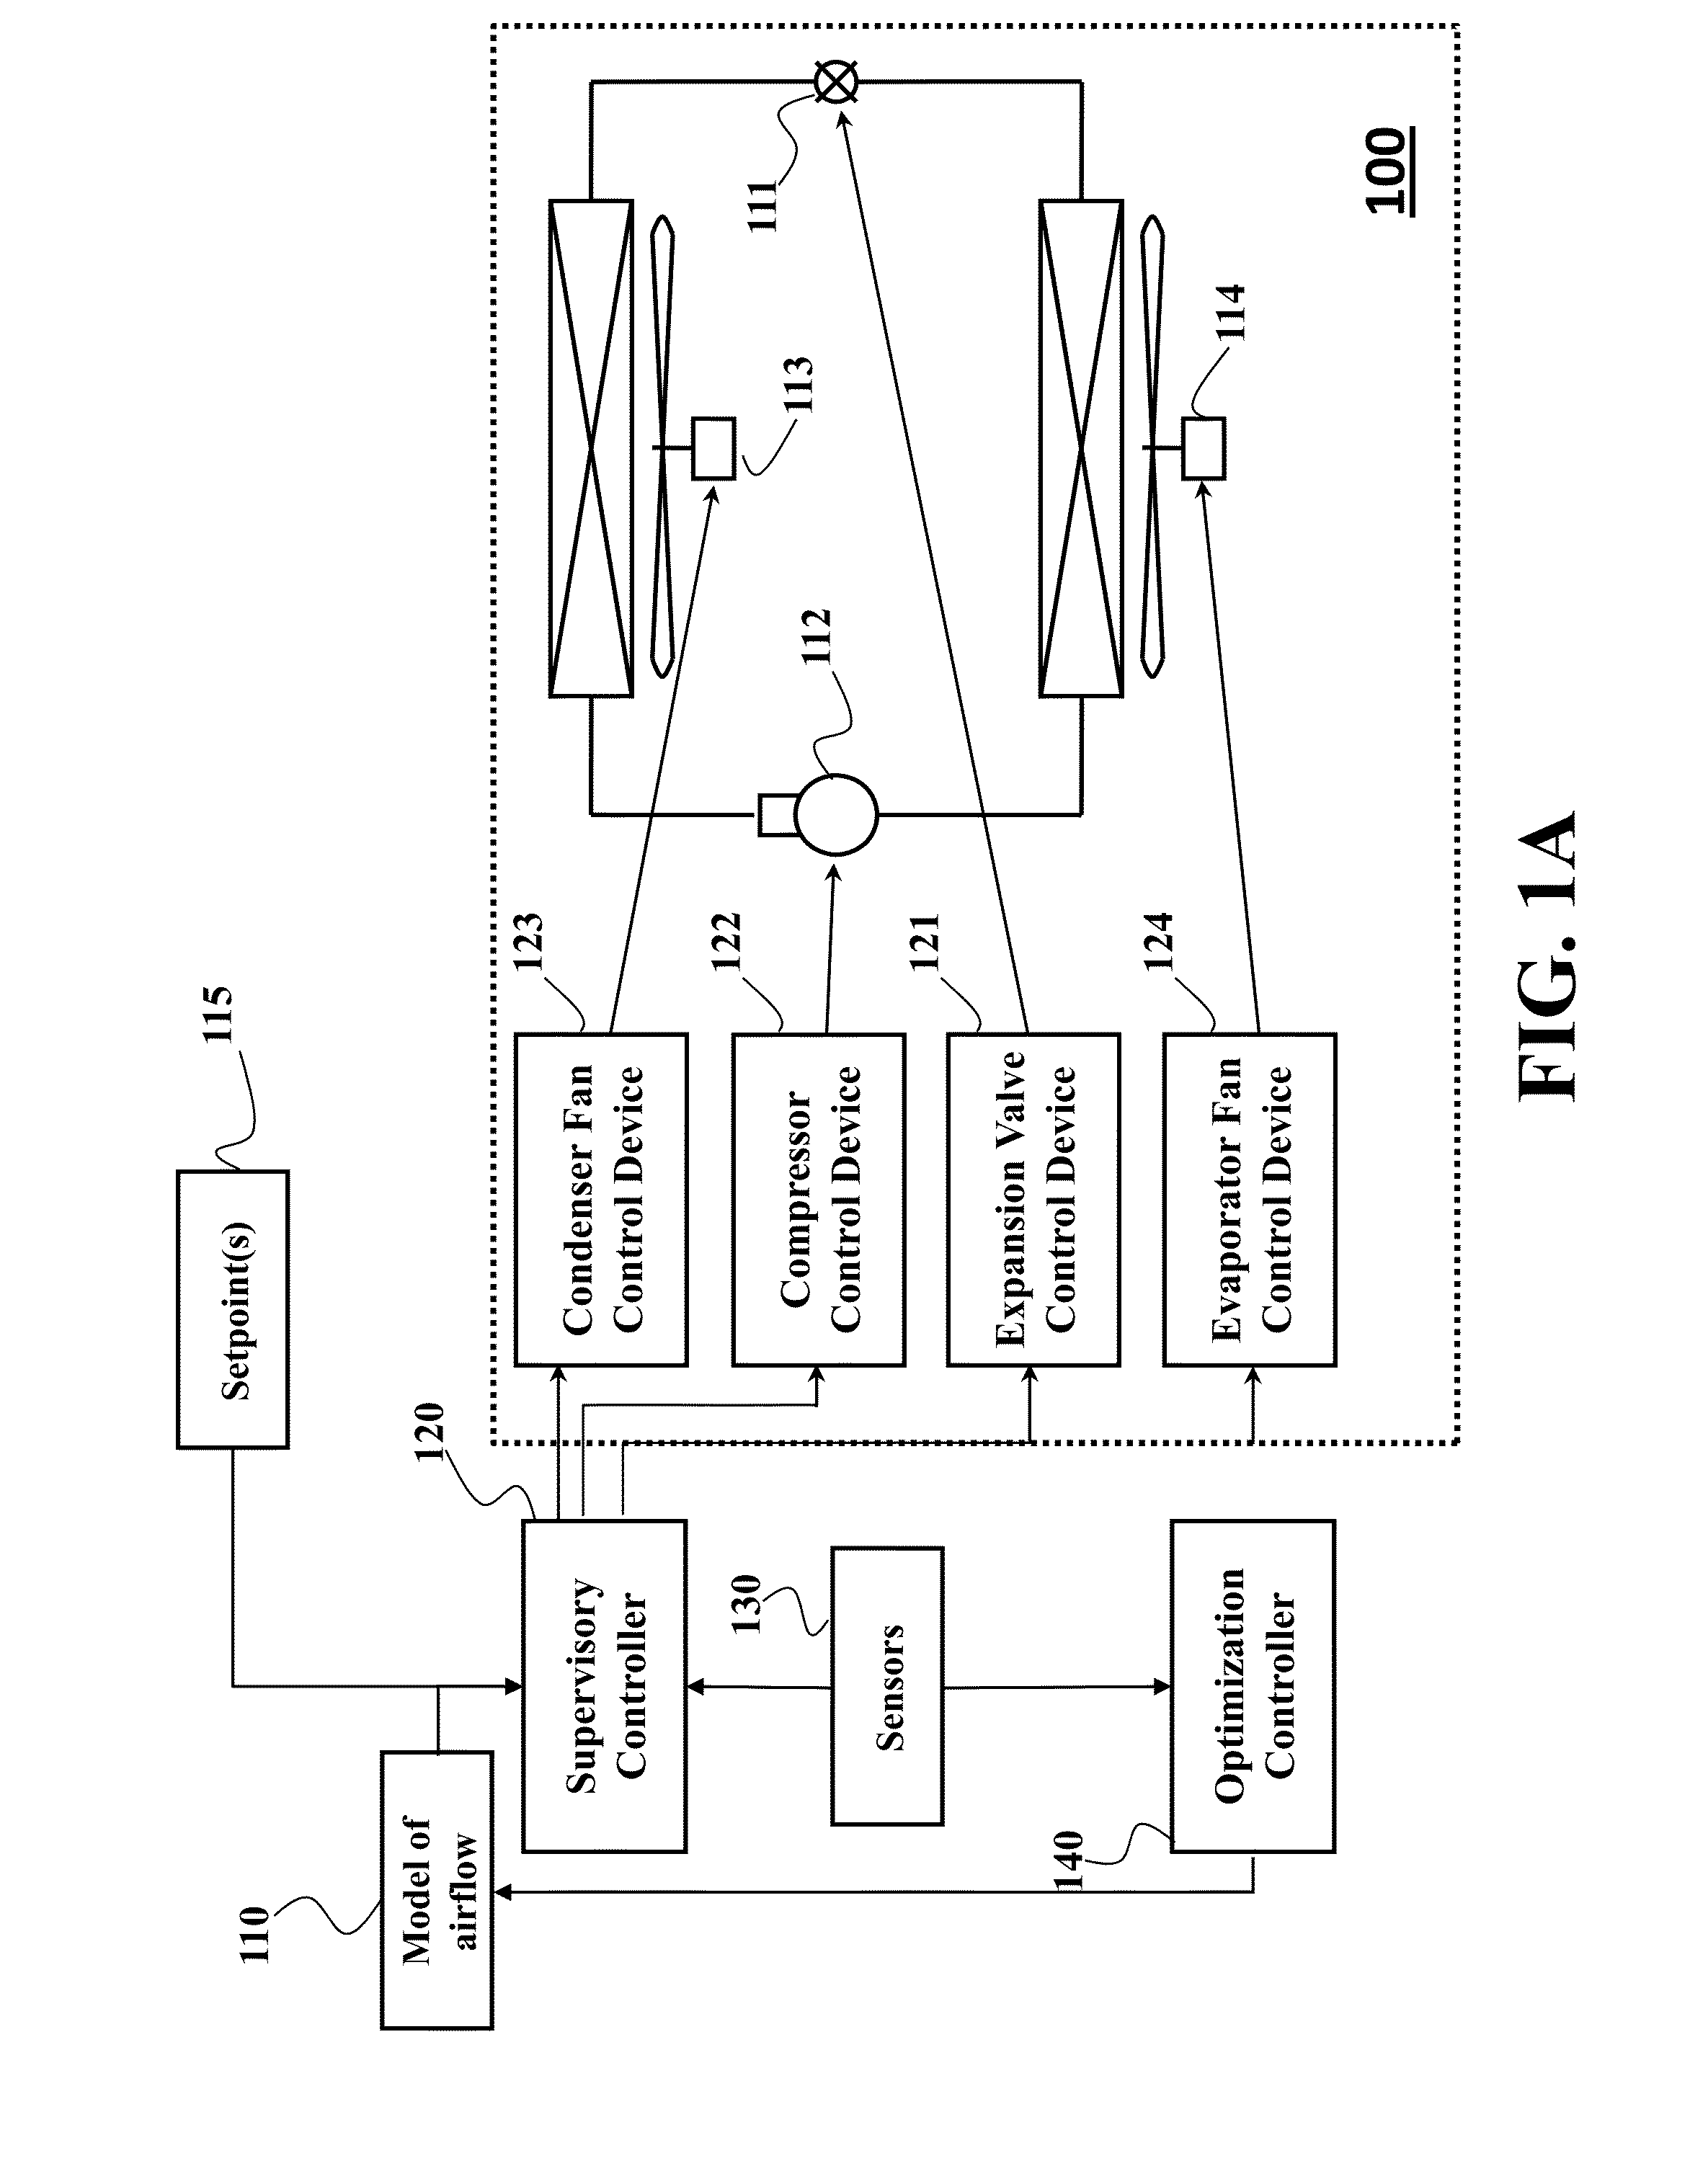 System and Method for Controlling Operations of Air-Conditioning System